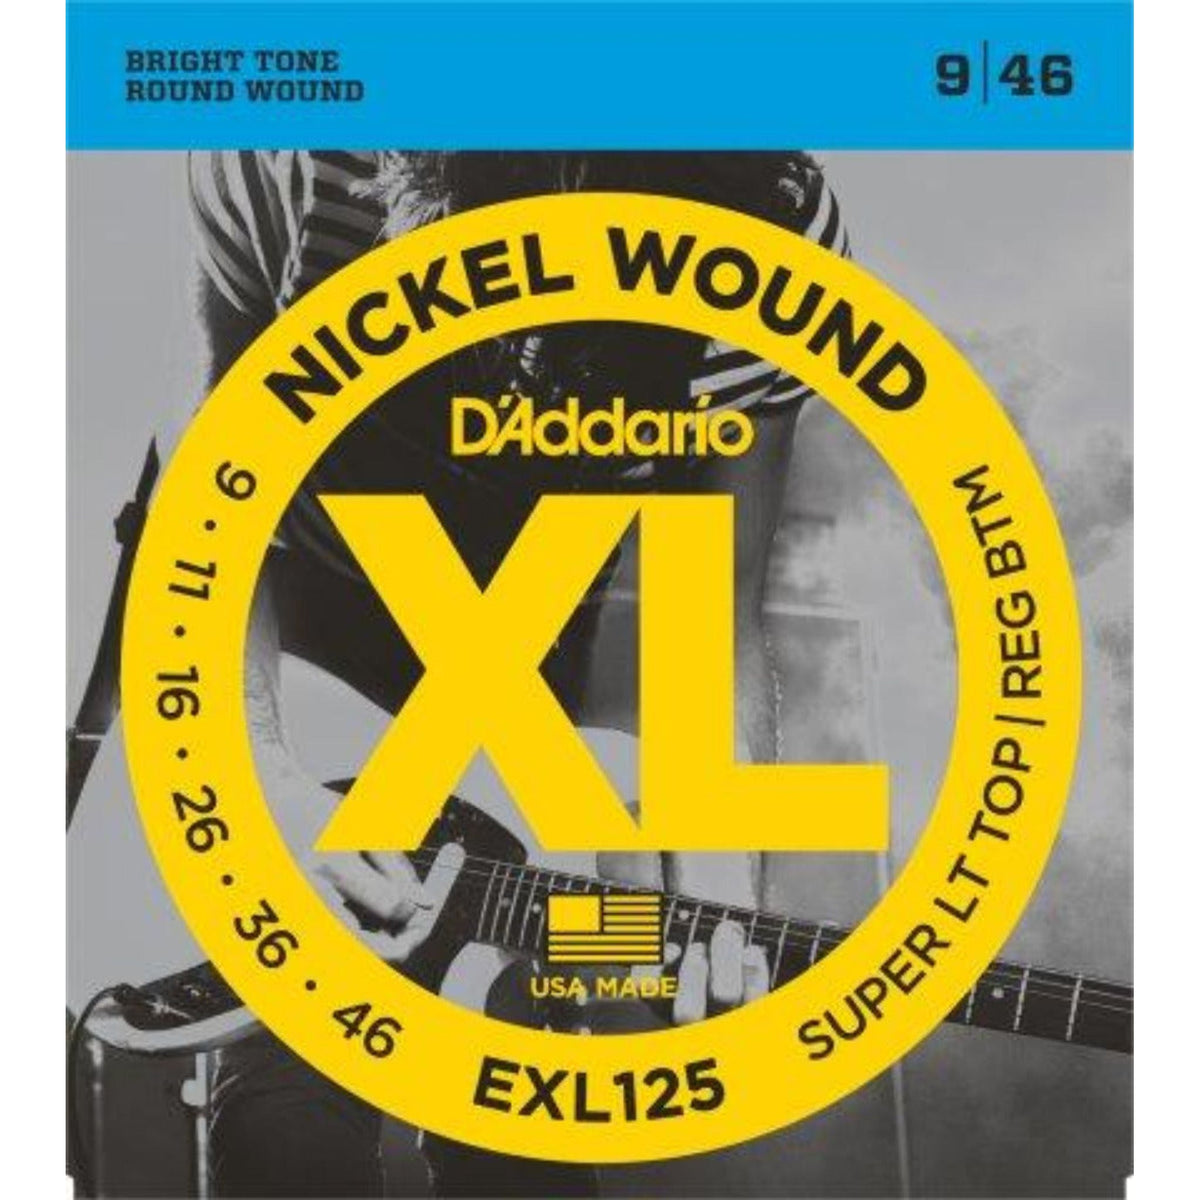 EXL125 is D&#39;Addario&#39;s best selling hybrid set, combining the high strings from an EXL120 (.009) with the low strings from an EXL110 (.046). The result is a set with strong fundamental low end, but with super flexibility on the high strings.